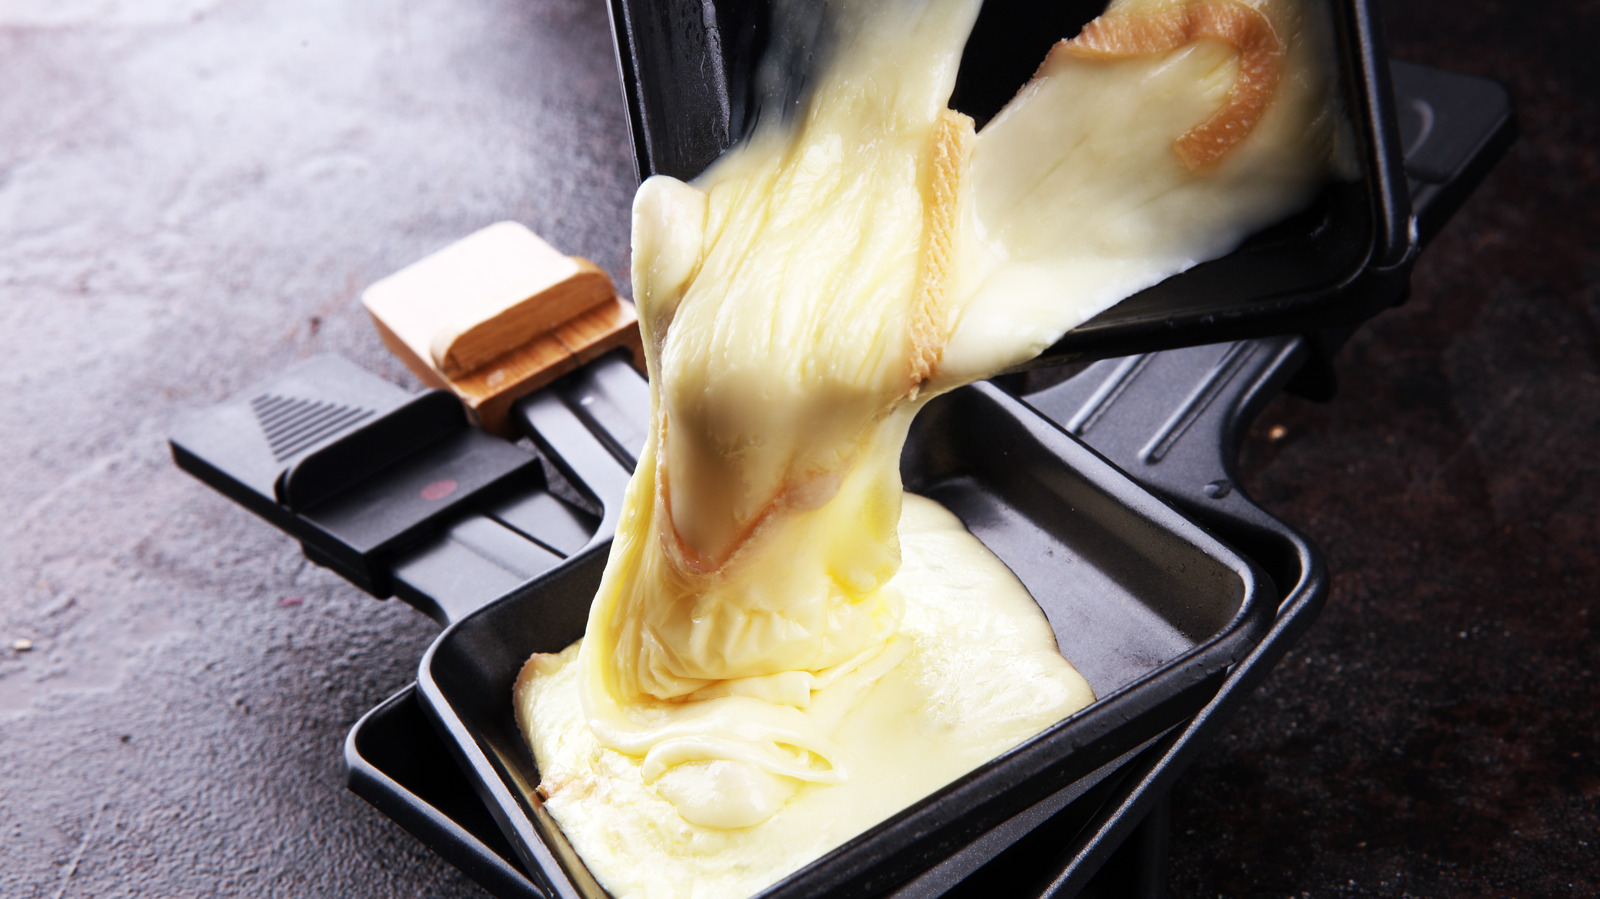 RacletteCorner: The only store in the US dedicated to Raclette